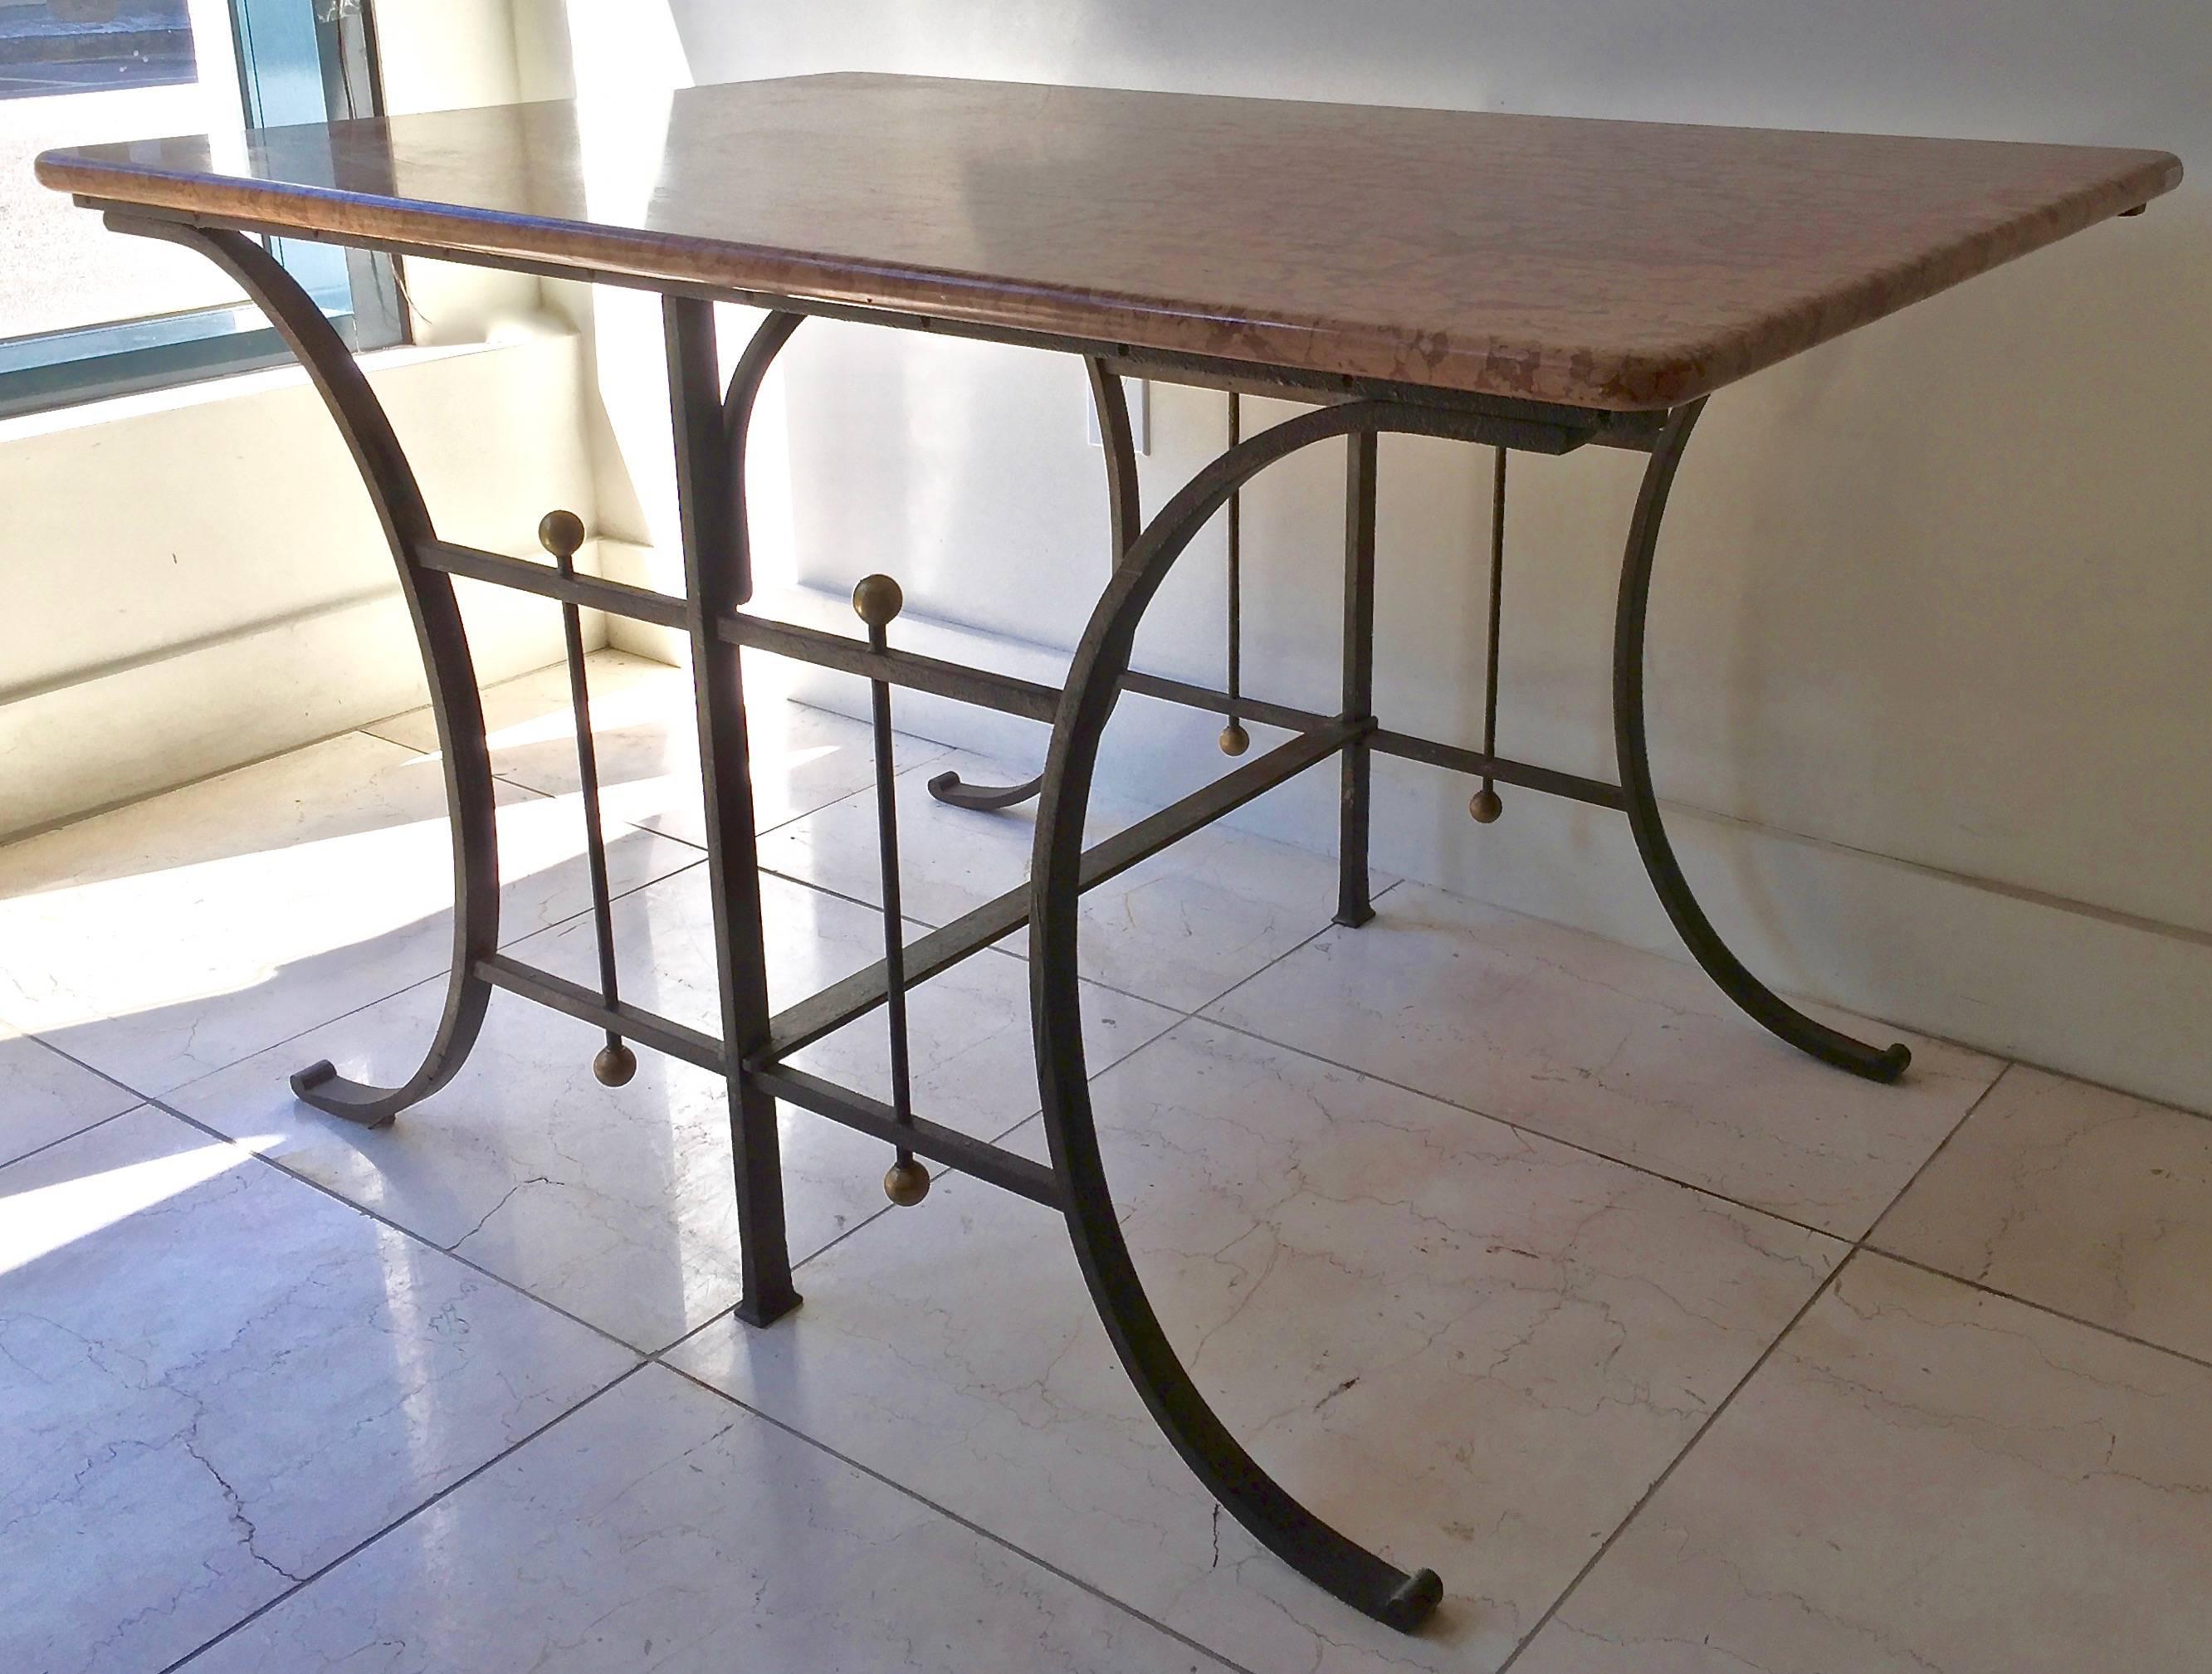 19th century French large and heavy butcher table has original rich color Italian Rosa Verona marble top and beautiful wrought iron base with brass details. The French Butcher/Pastry table were used as presentation tables in the shop's window. These